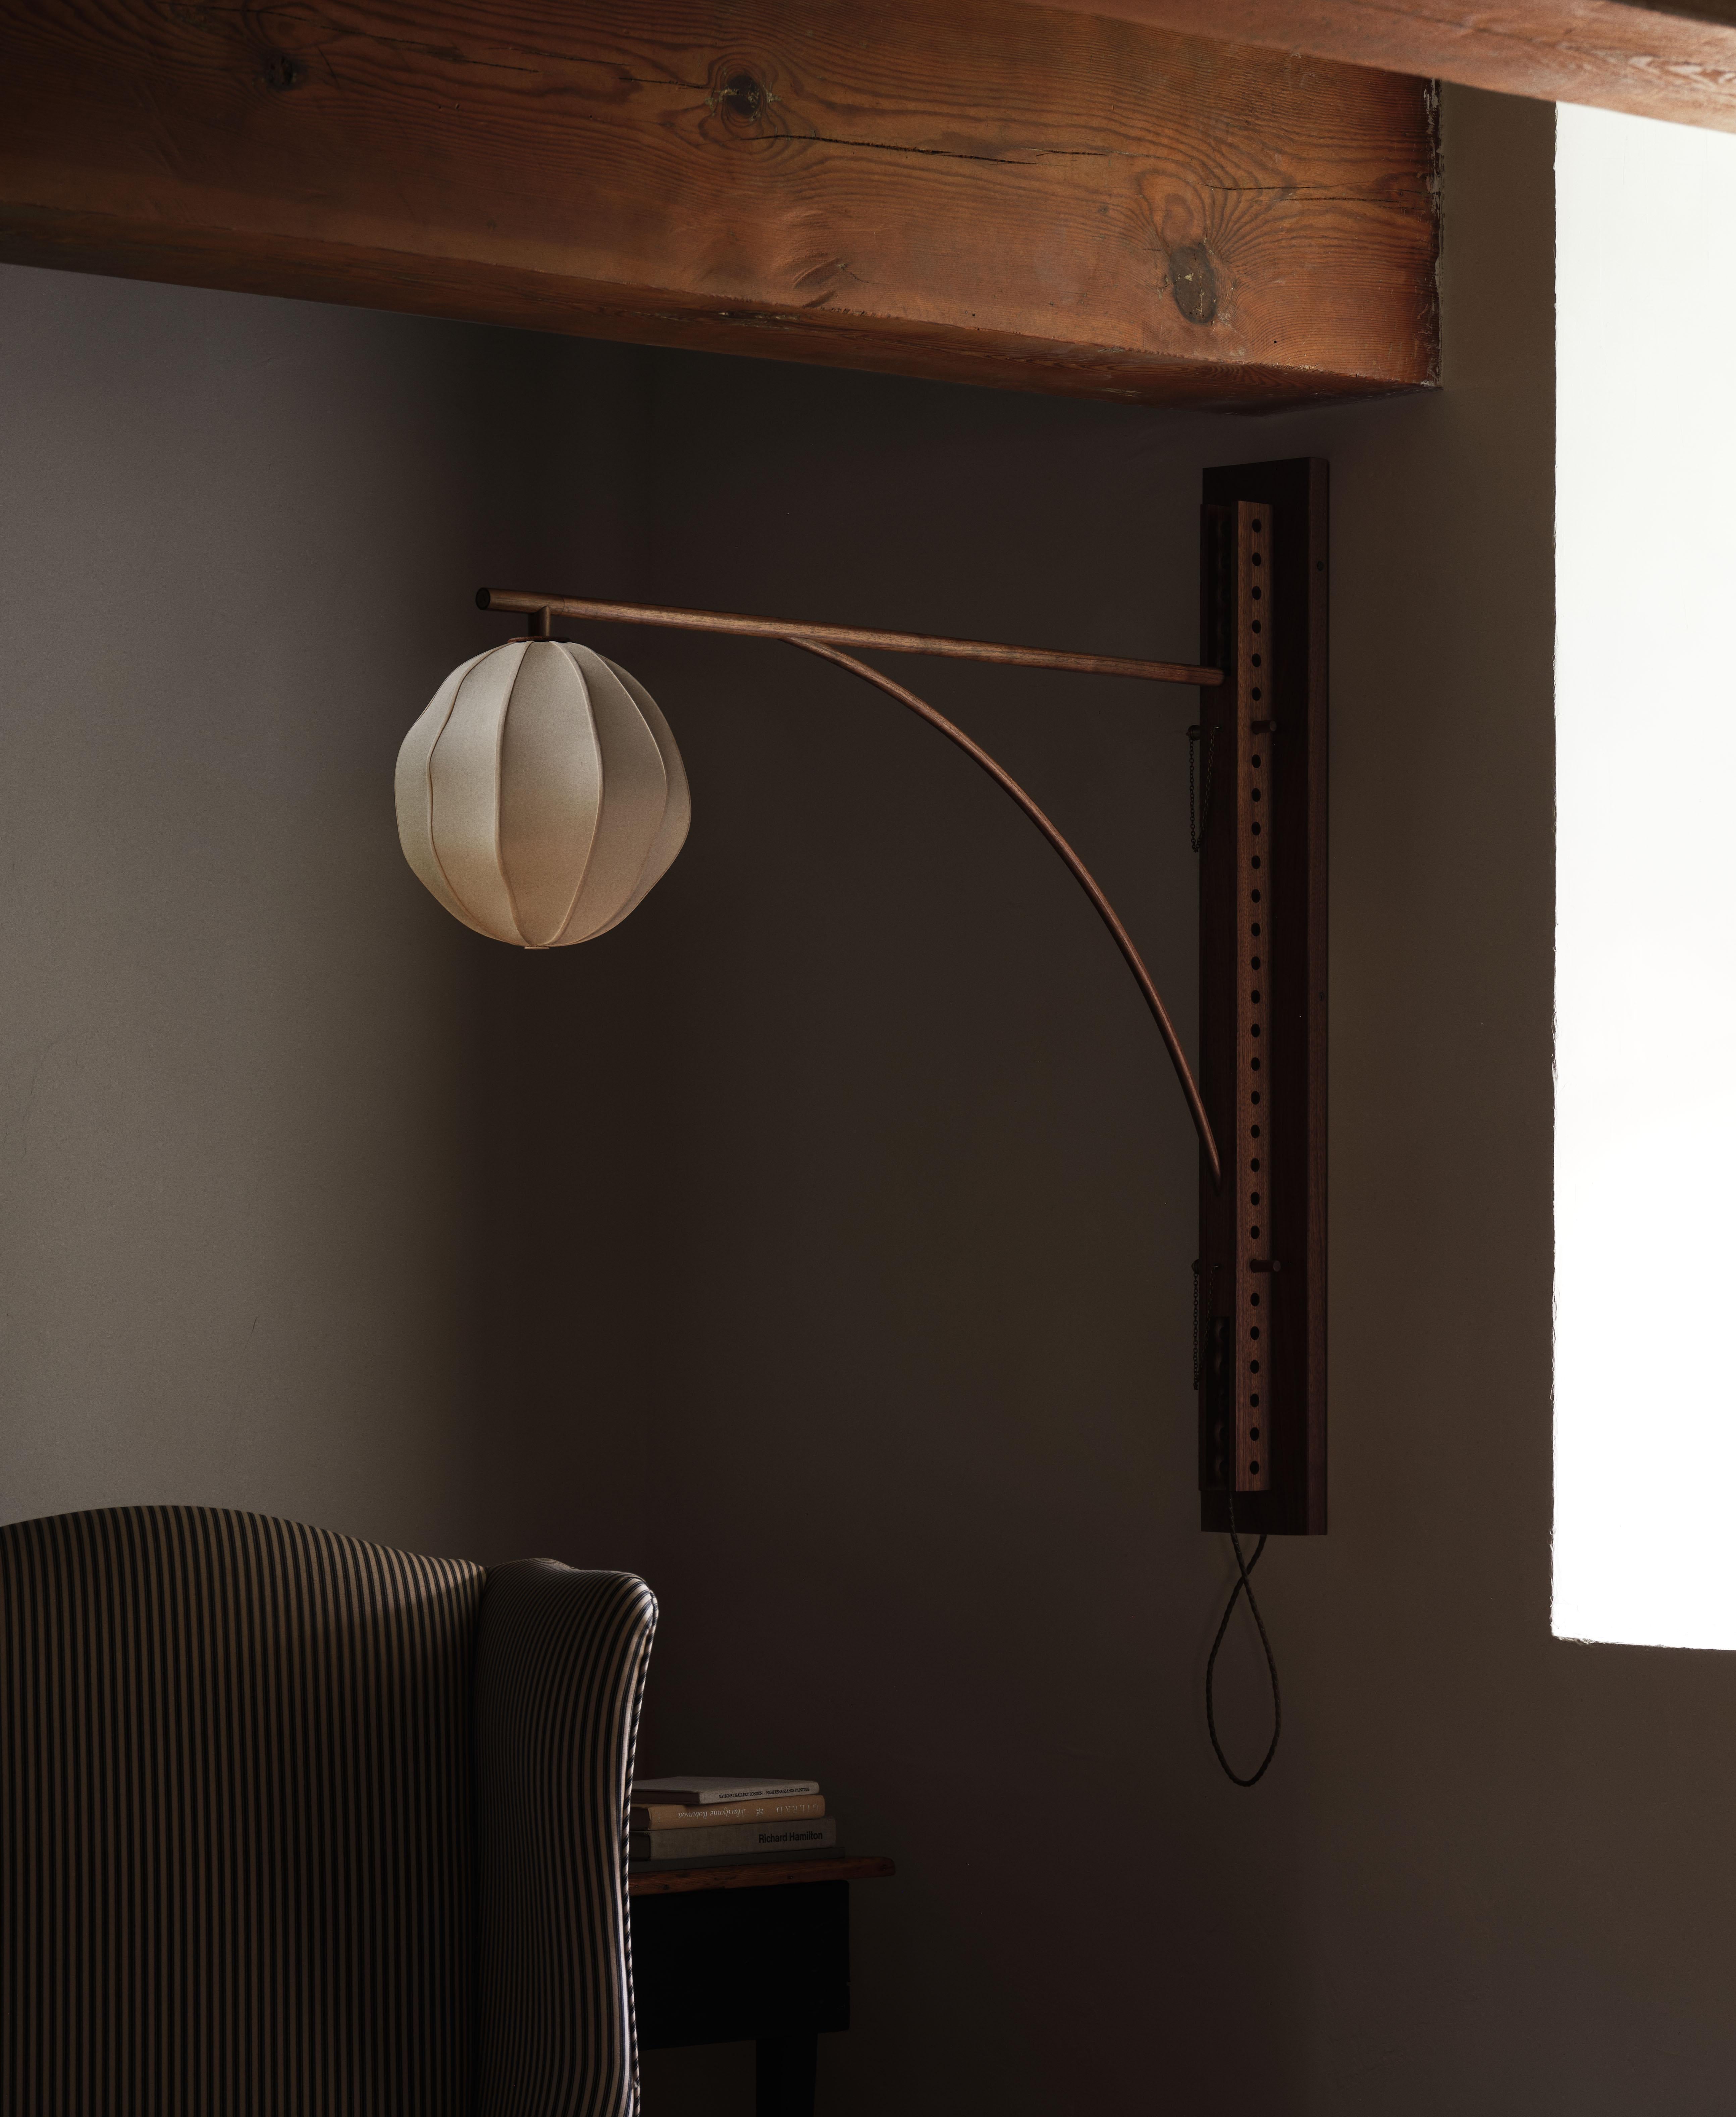 A perforated hardwood channel allows the lamp armature to be moved up or down to the desired height. A hand-upholstered silk globe is suspended from the end of the armature, providing a warm glow.

Materials: White Oak or Black Walnut with Silk